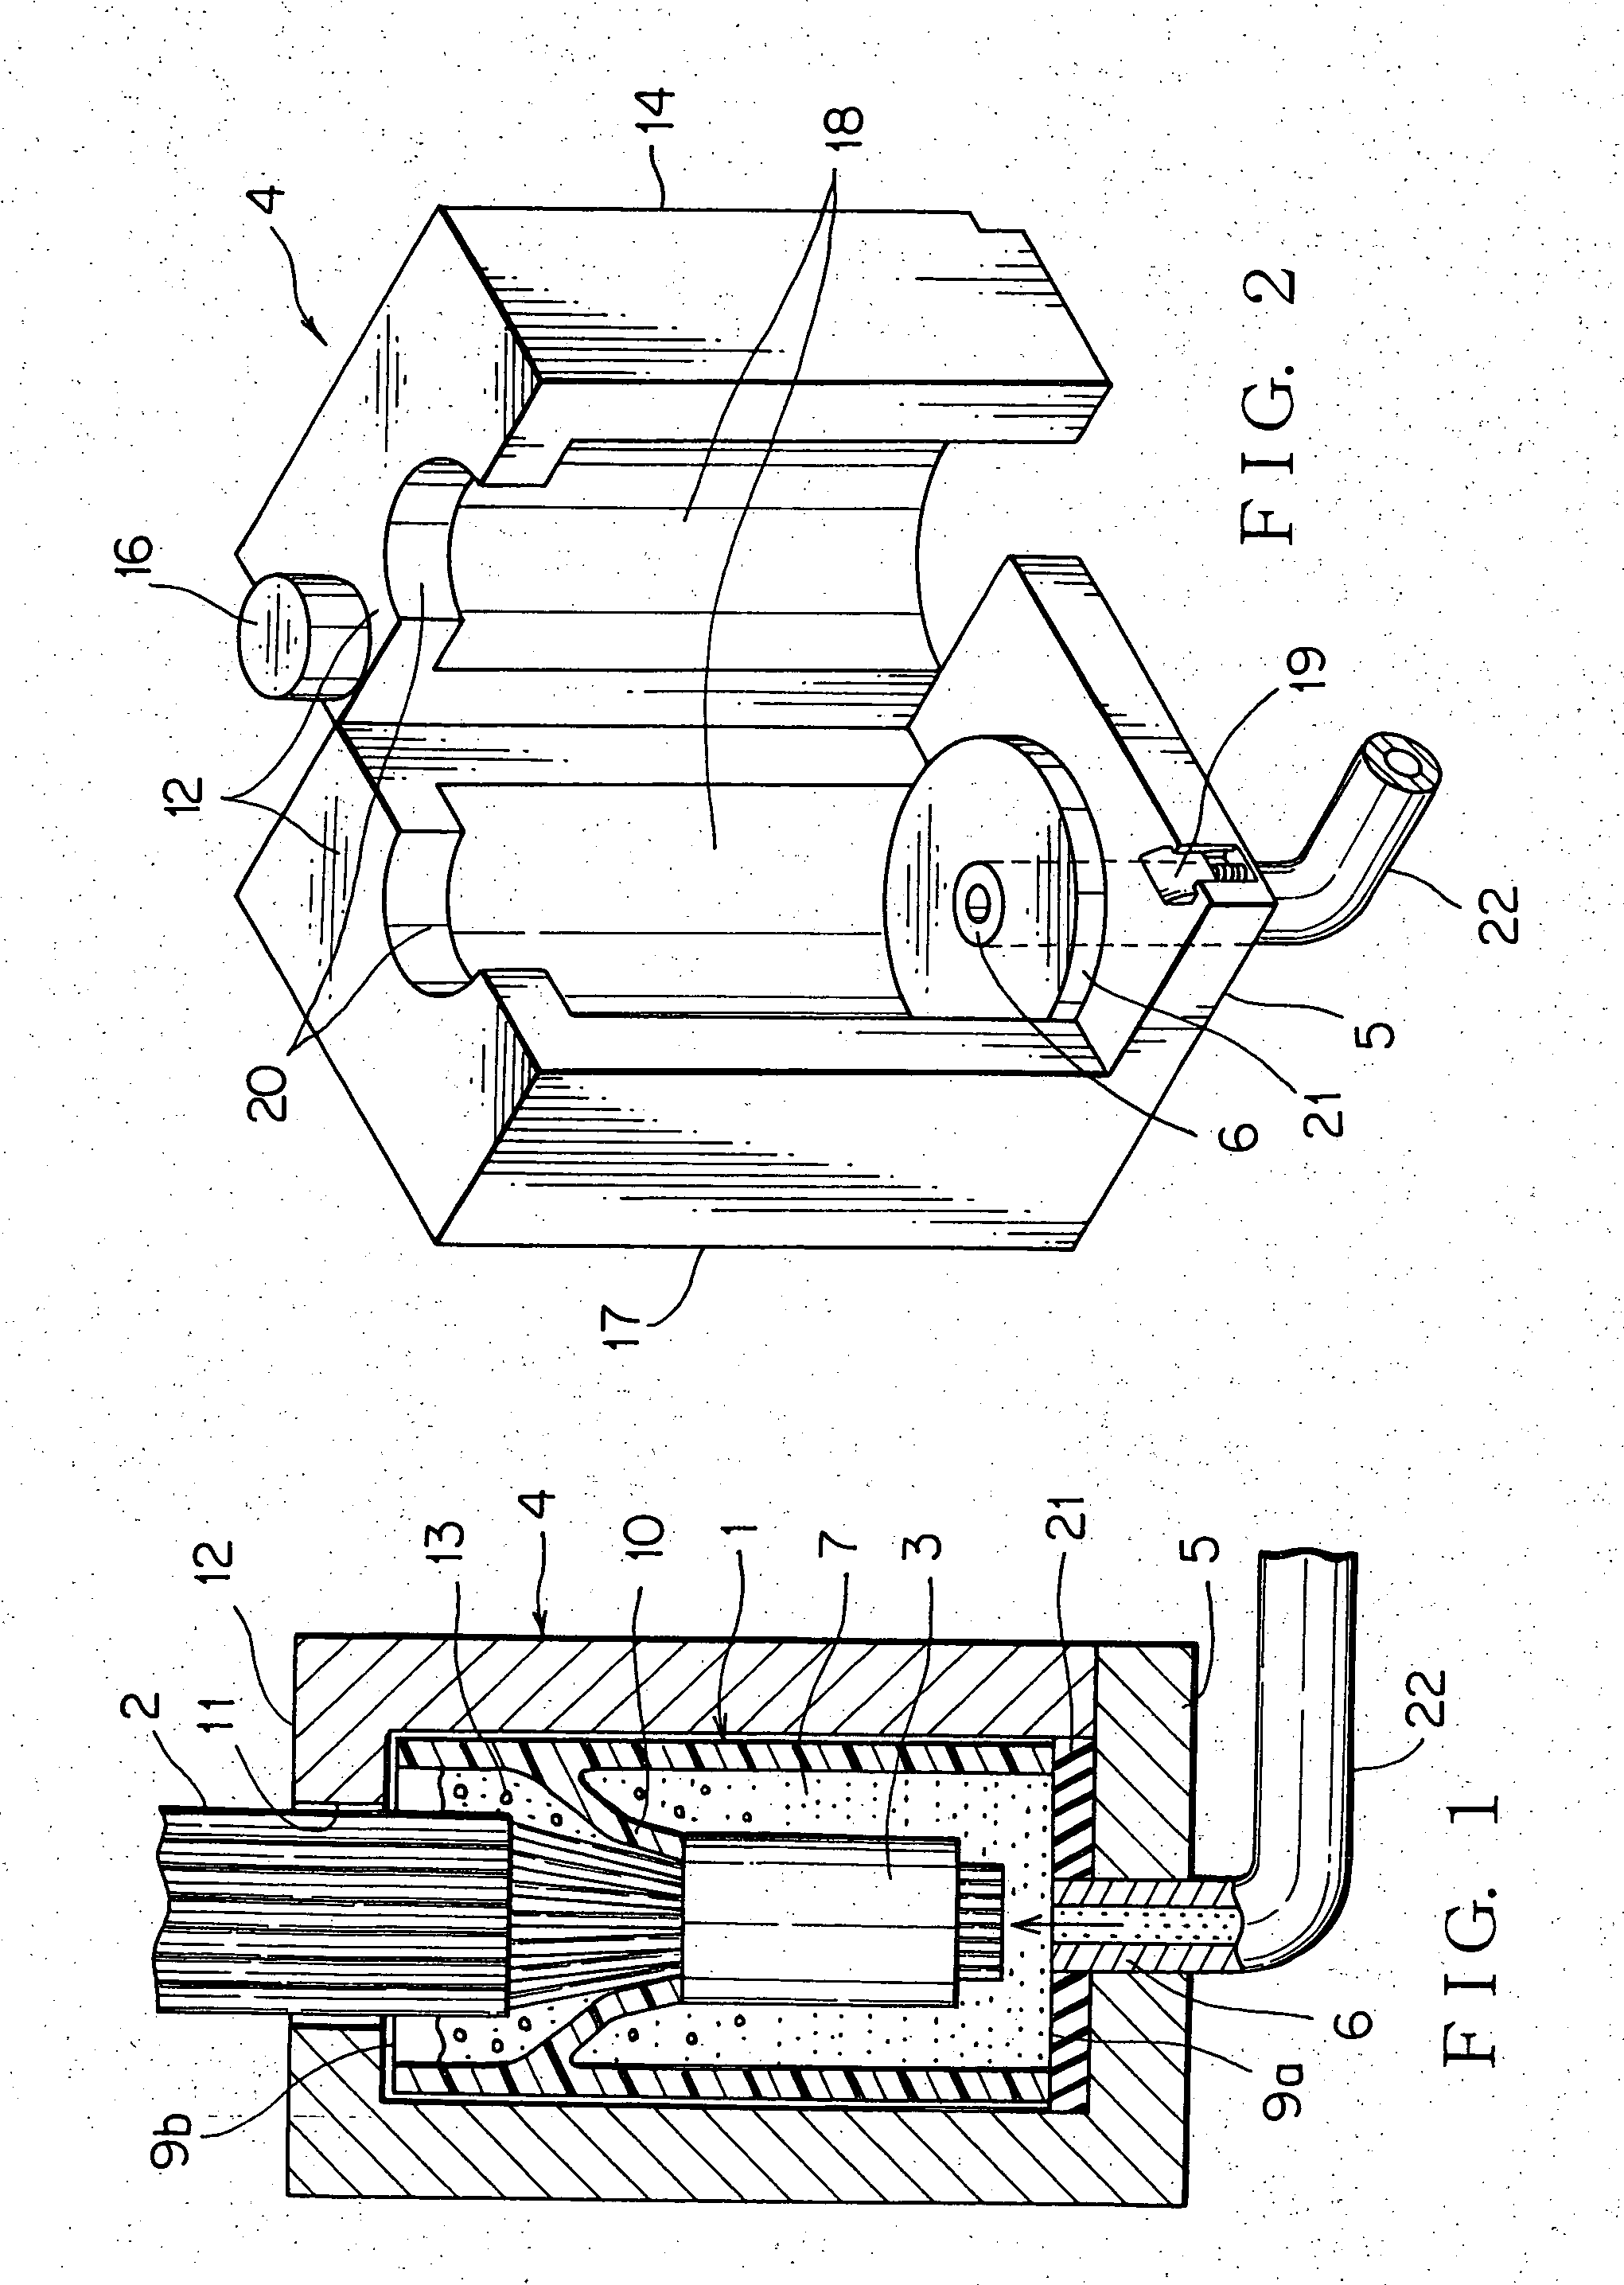 Method of waterproof of electric cable joint